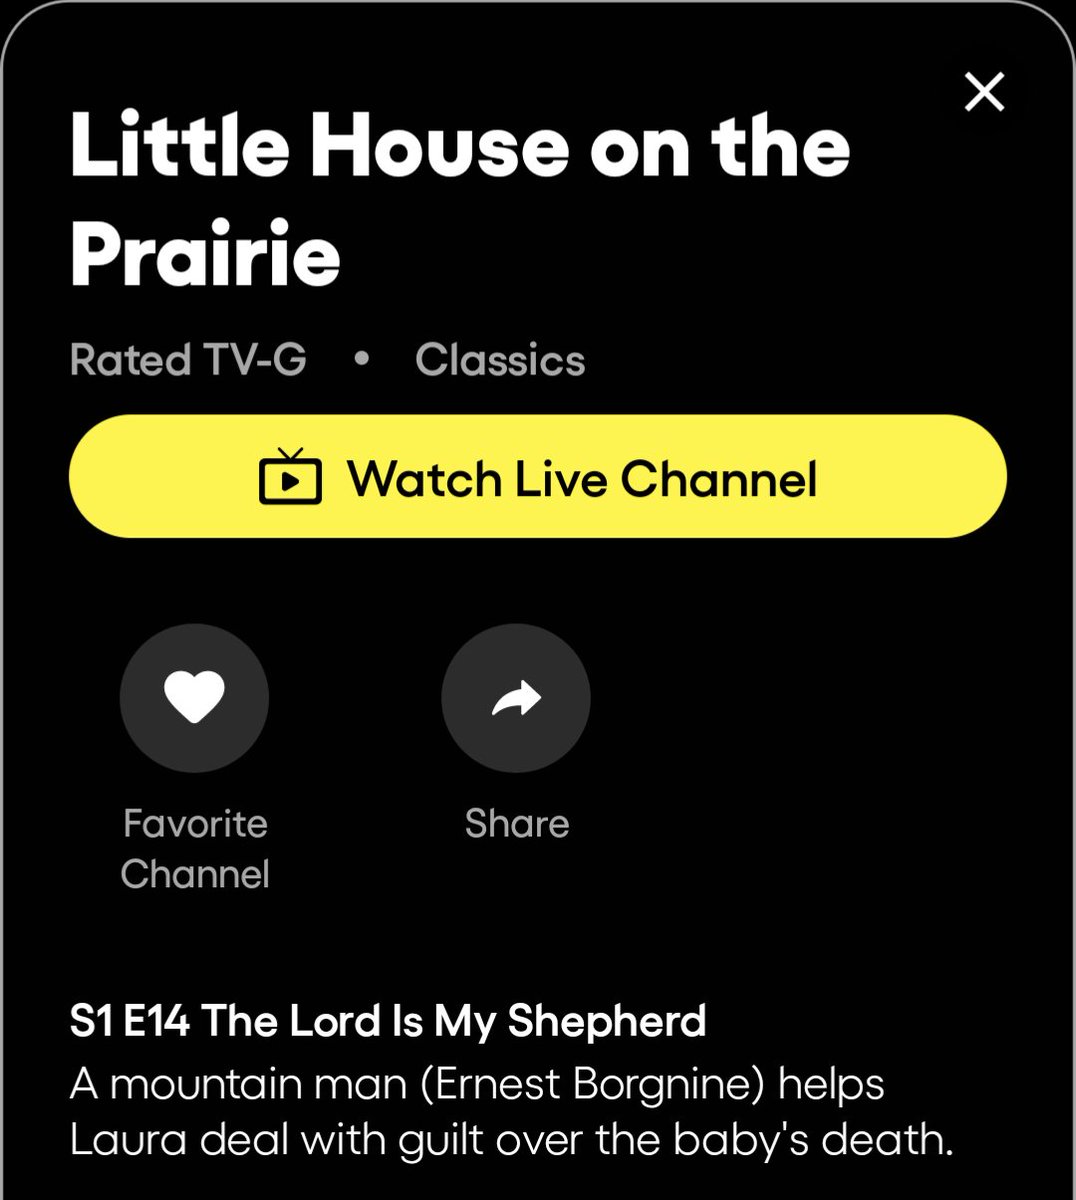 #NowPlaying on @PlutoTV #littlehouseontheprairie channel is one of my all time favorites from season 1.